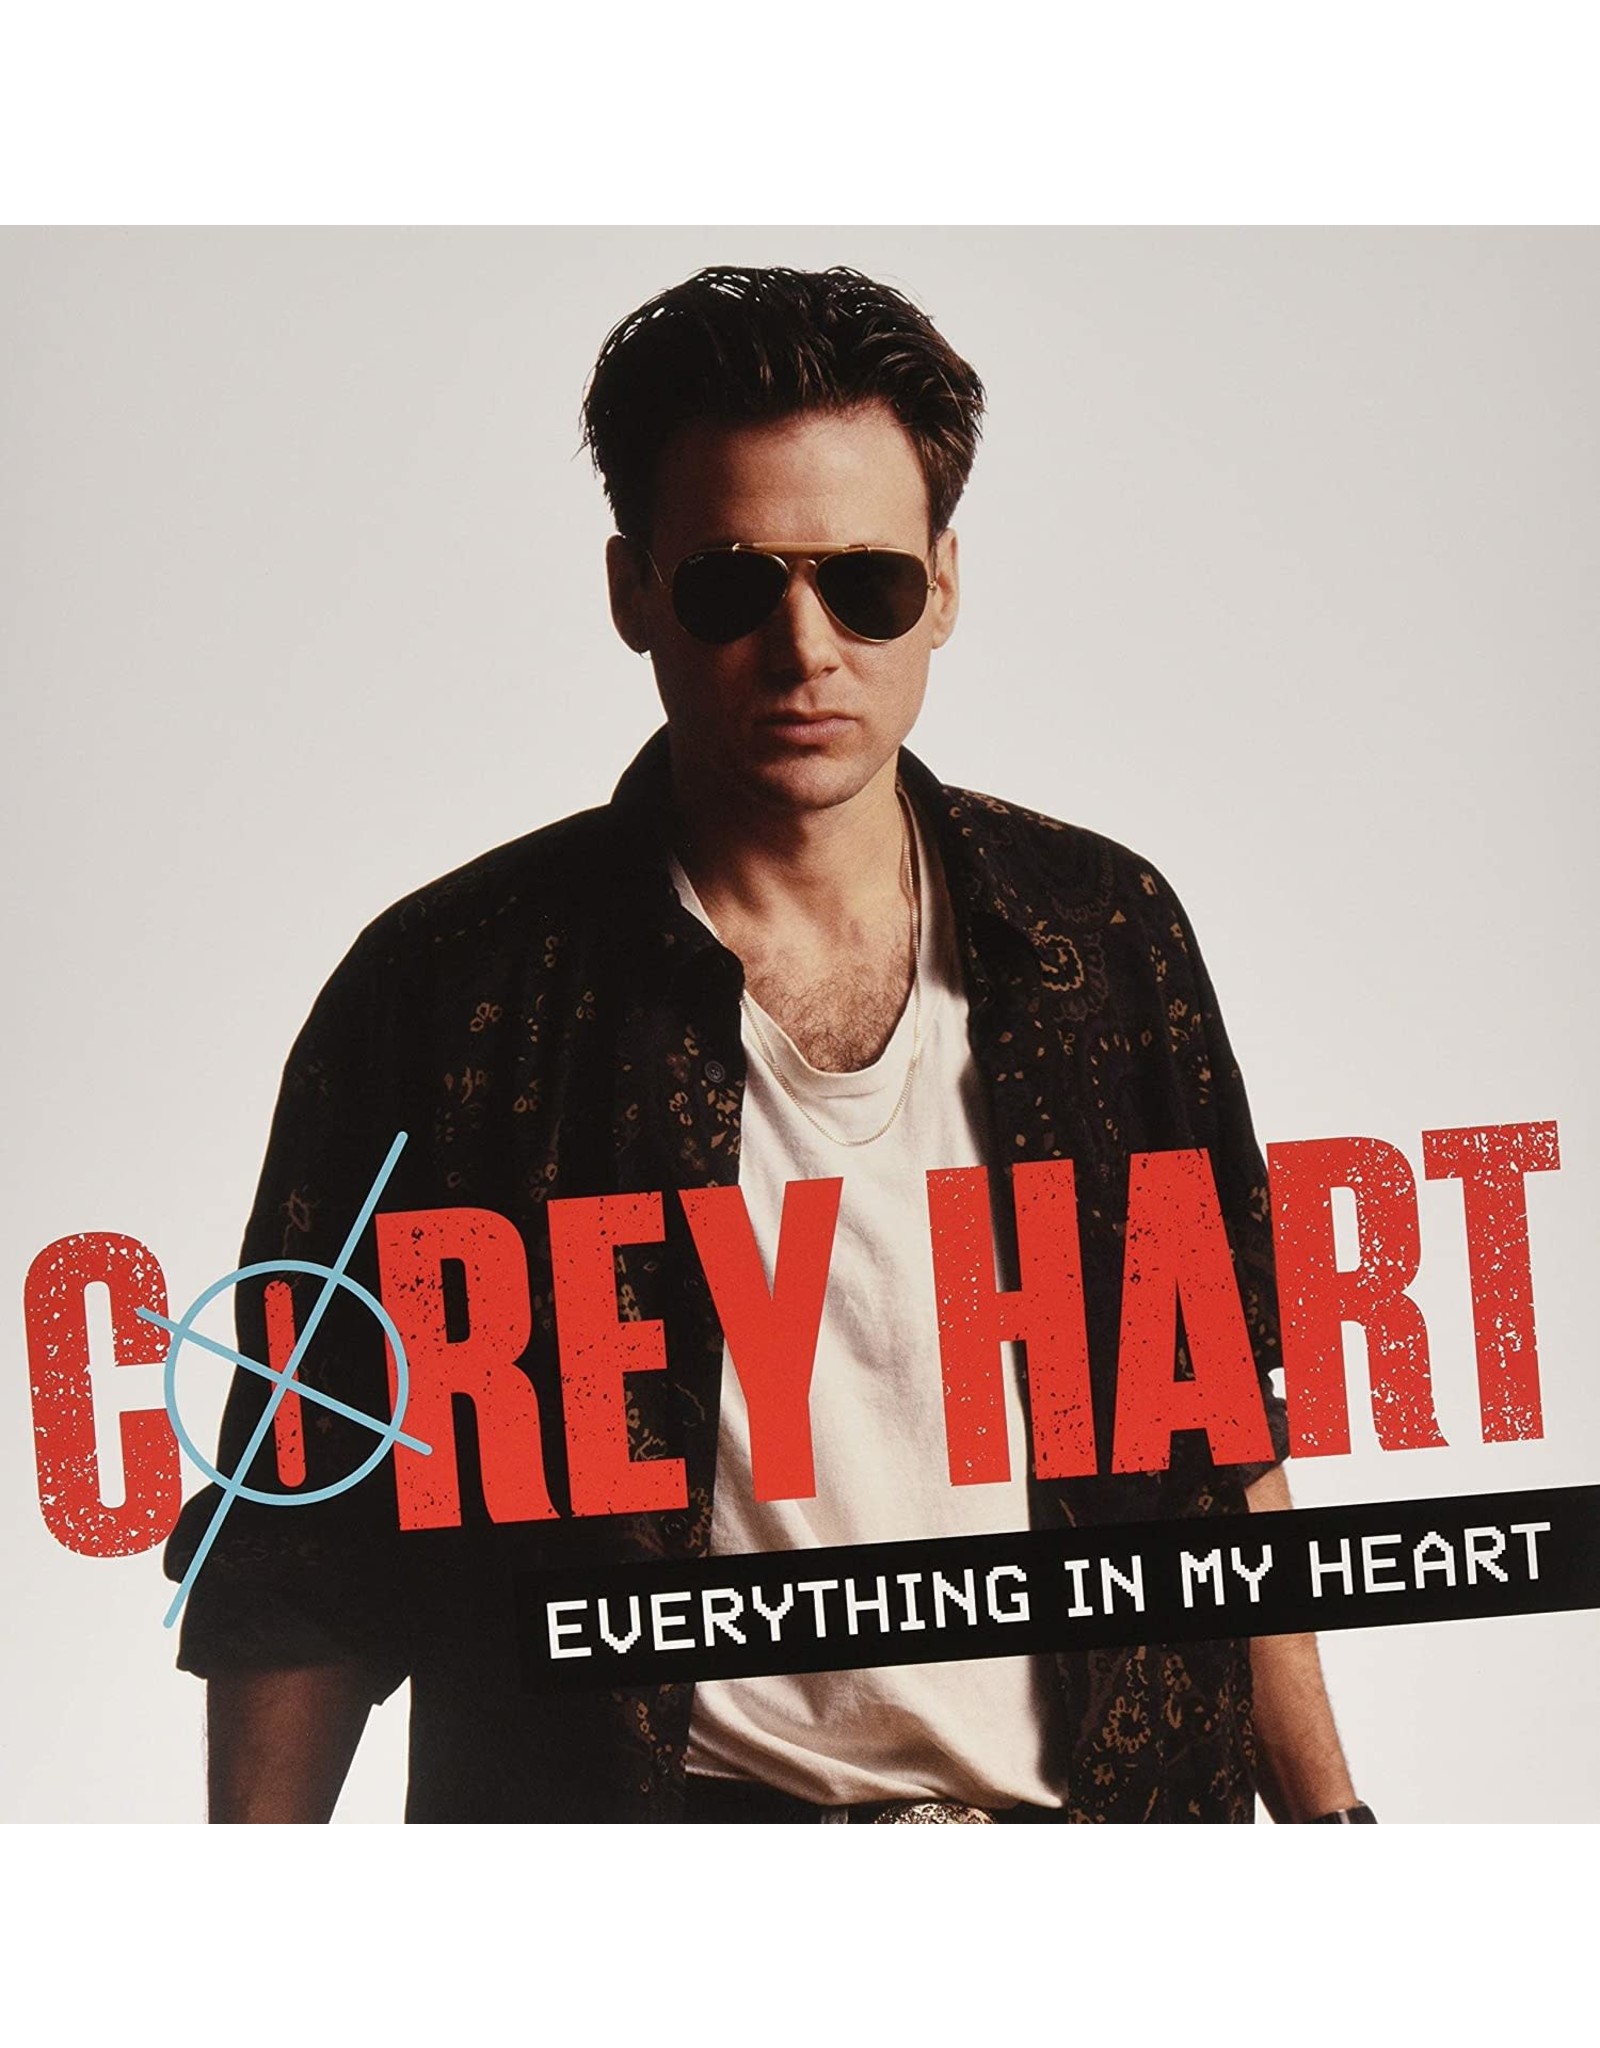 Corey Hart - Everything In My Heart: Greatest Hits (Red Vinyl)